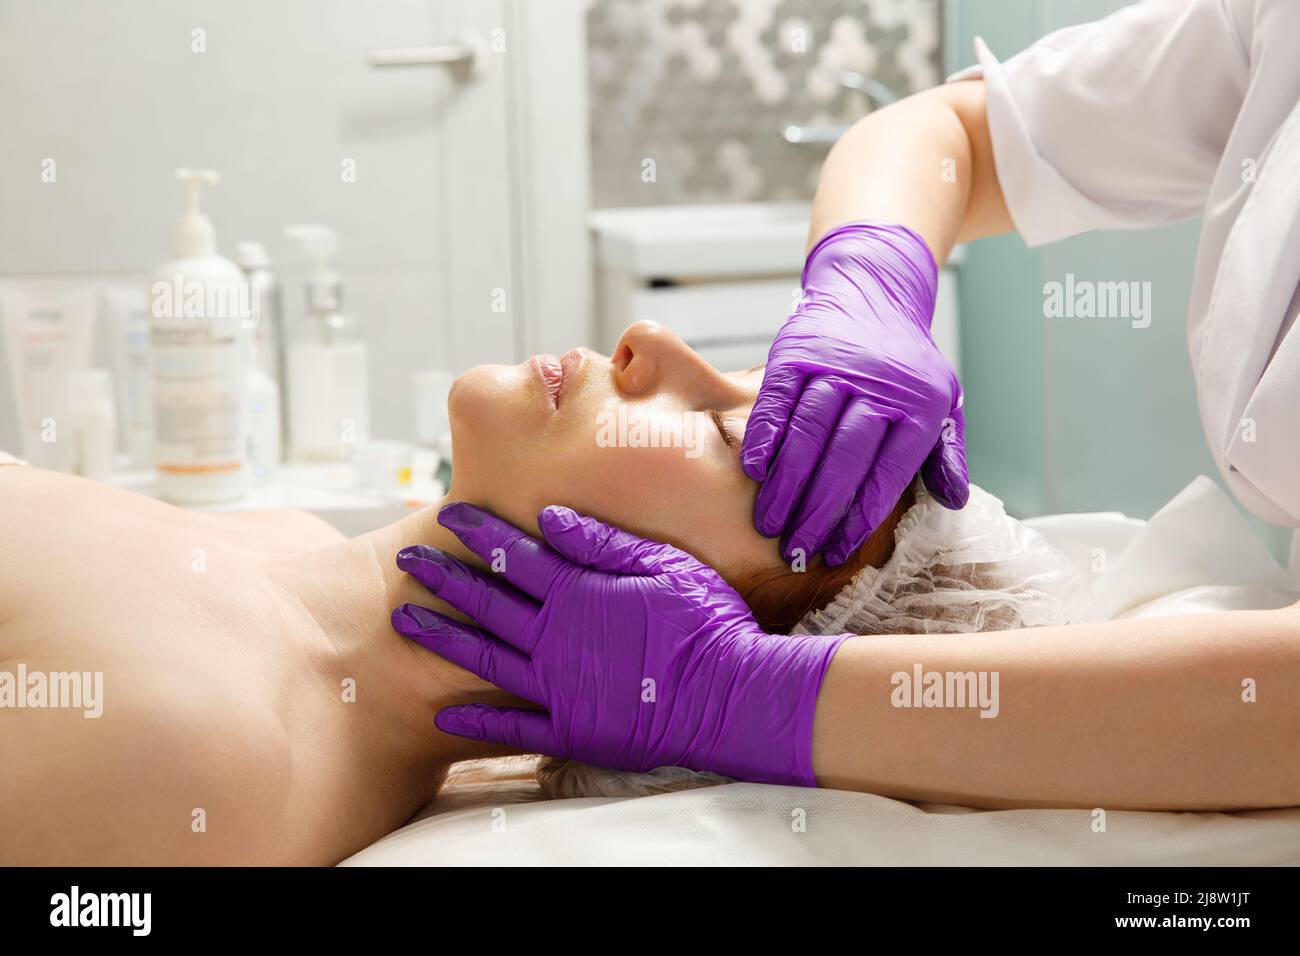 A woman gets a facial massage at a cosmetology clinic. Stock Photo